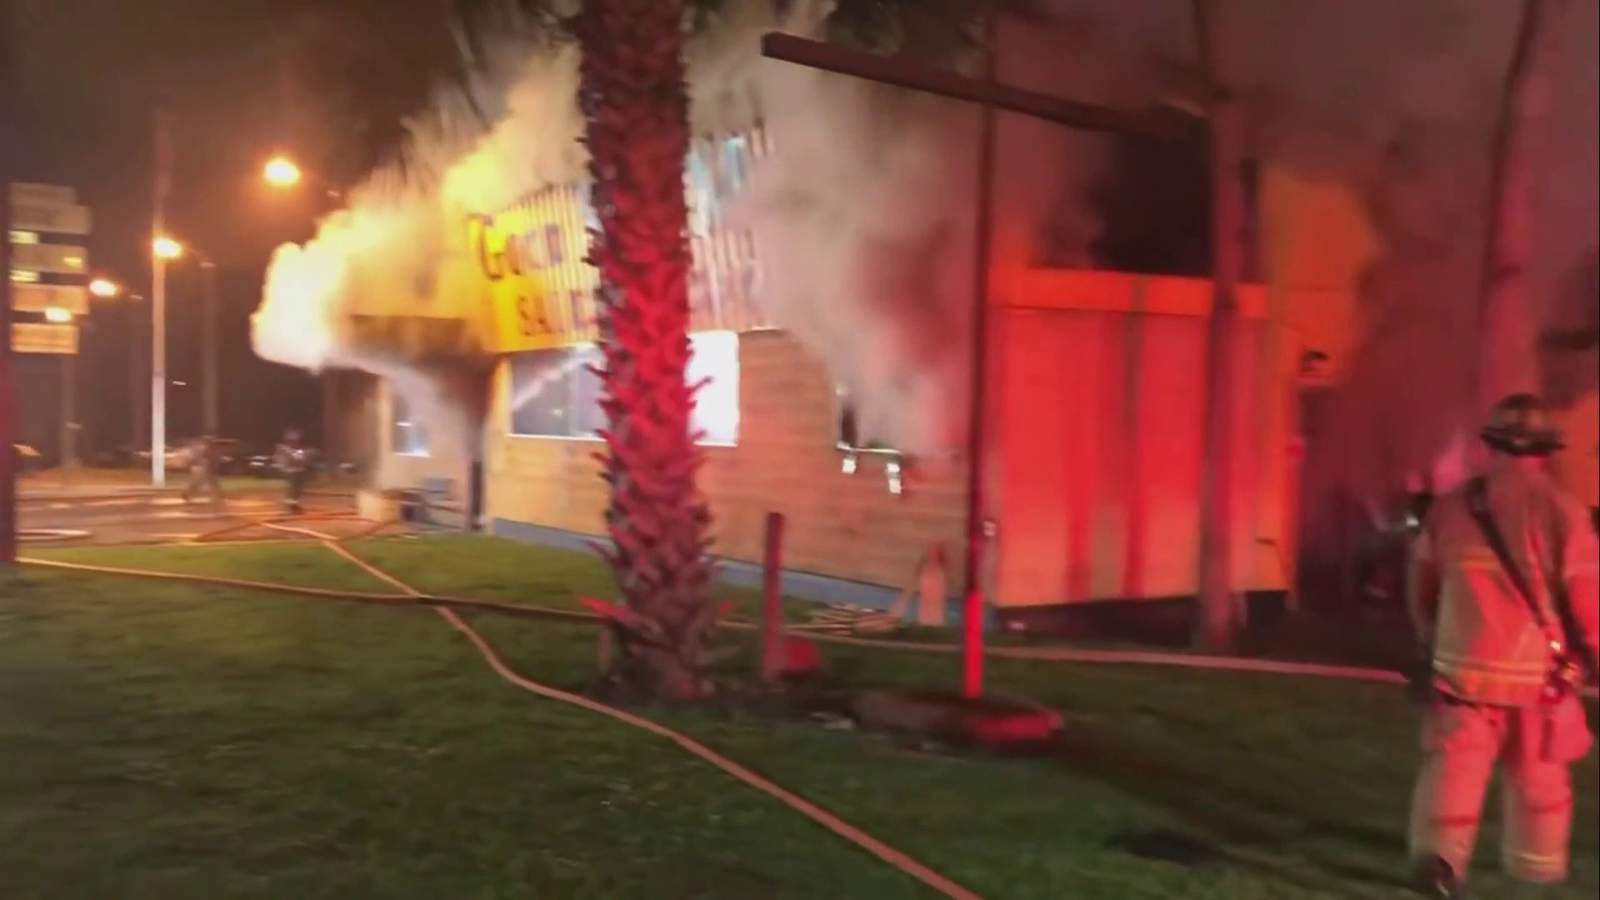 Used car business in Ocala badly damaged by fire